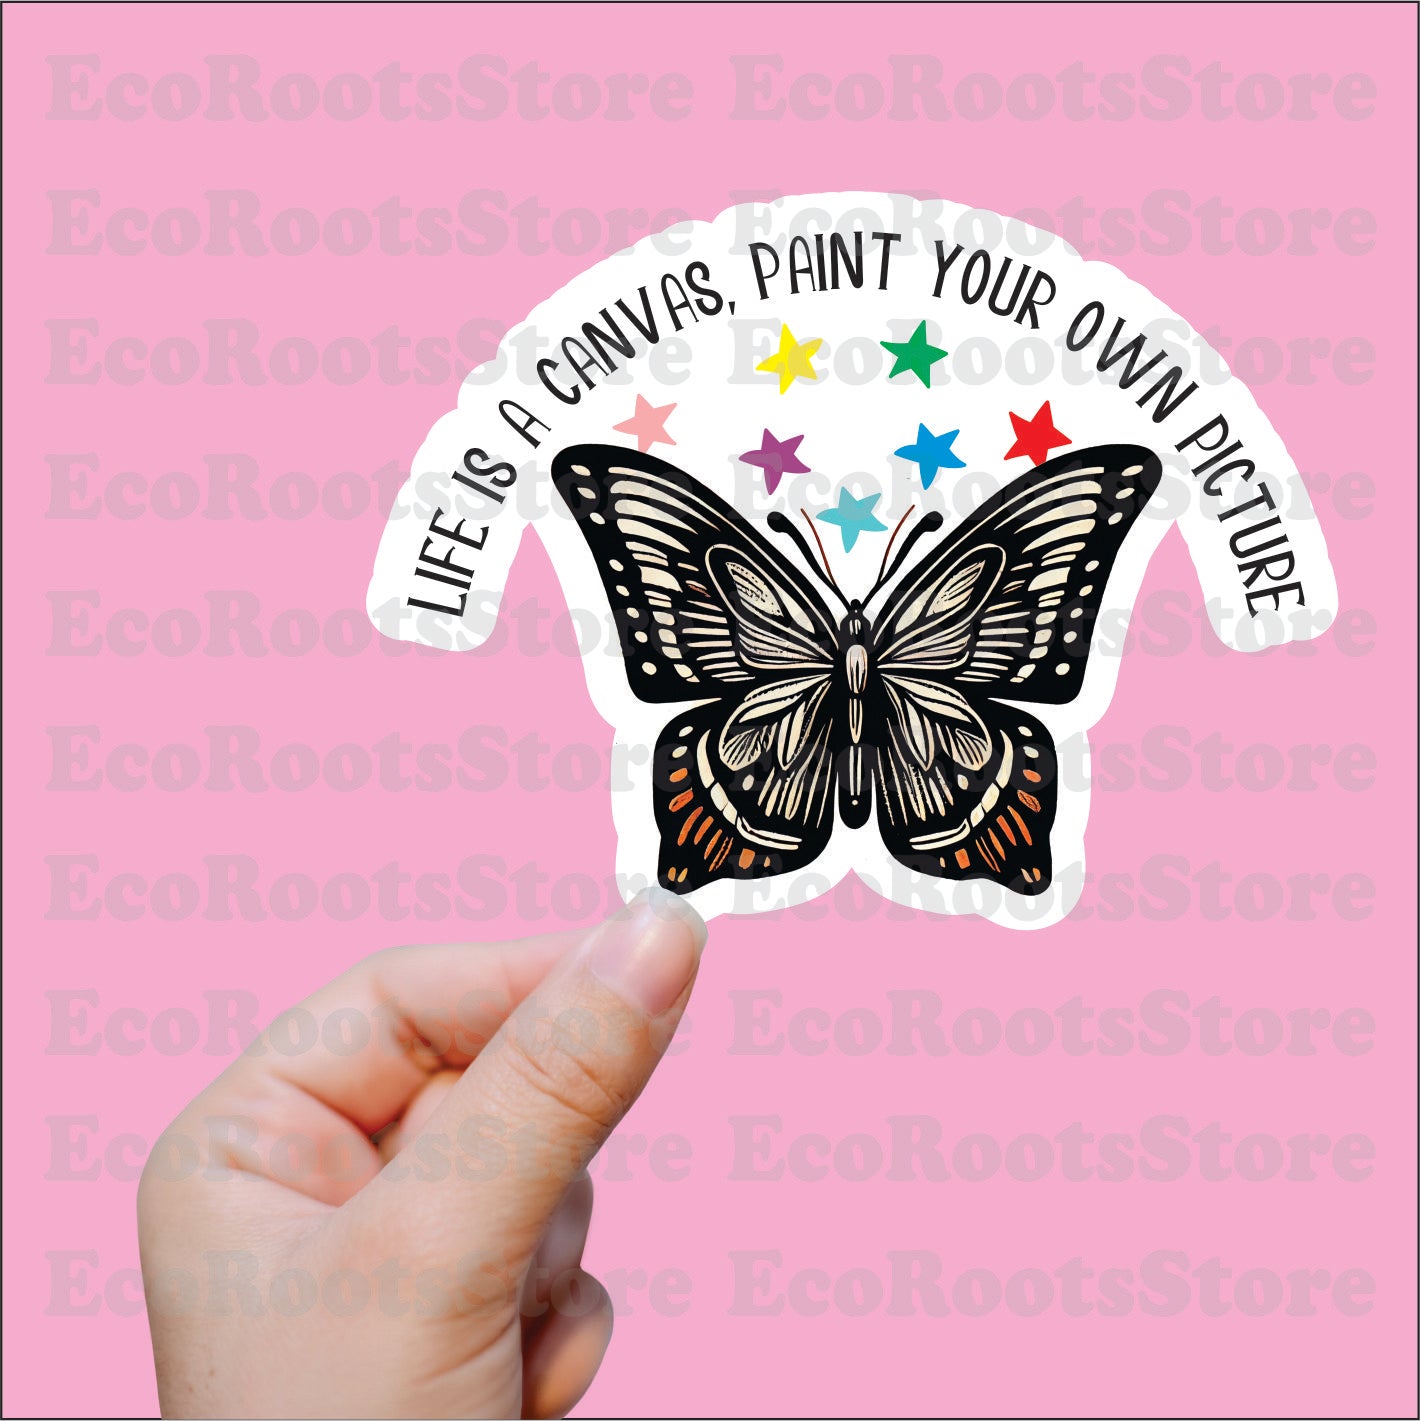 LIFE IS A CANVAS, PAINT YOUR OWN PICTURE Vinyl Sticker